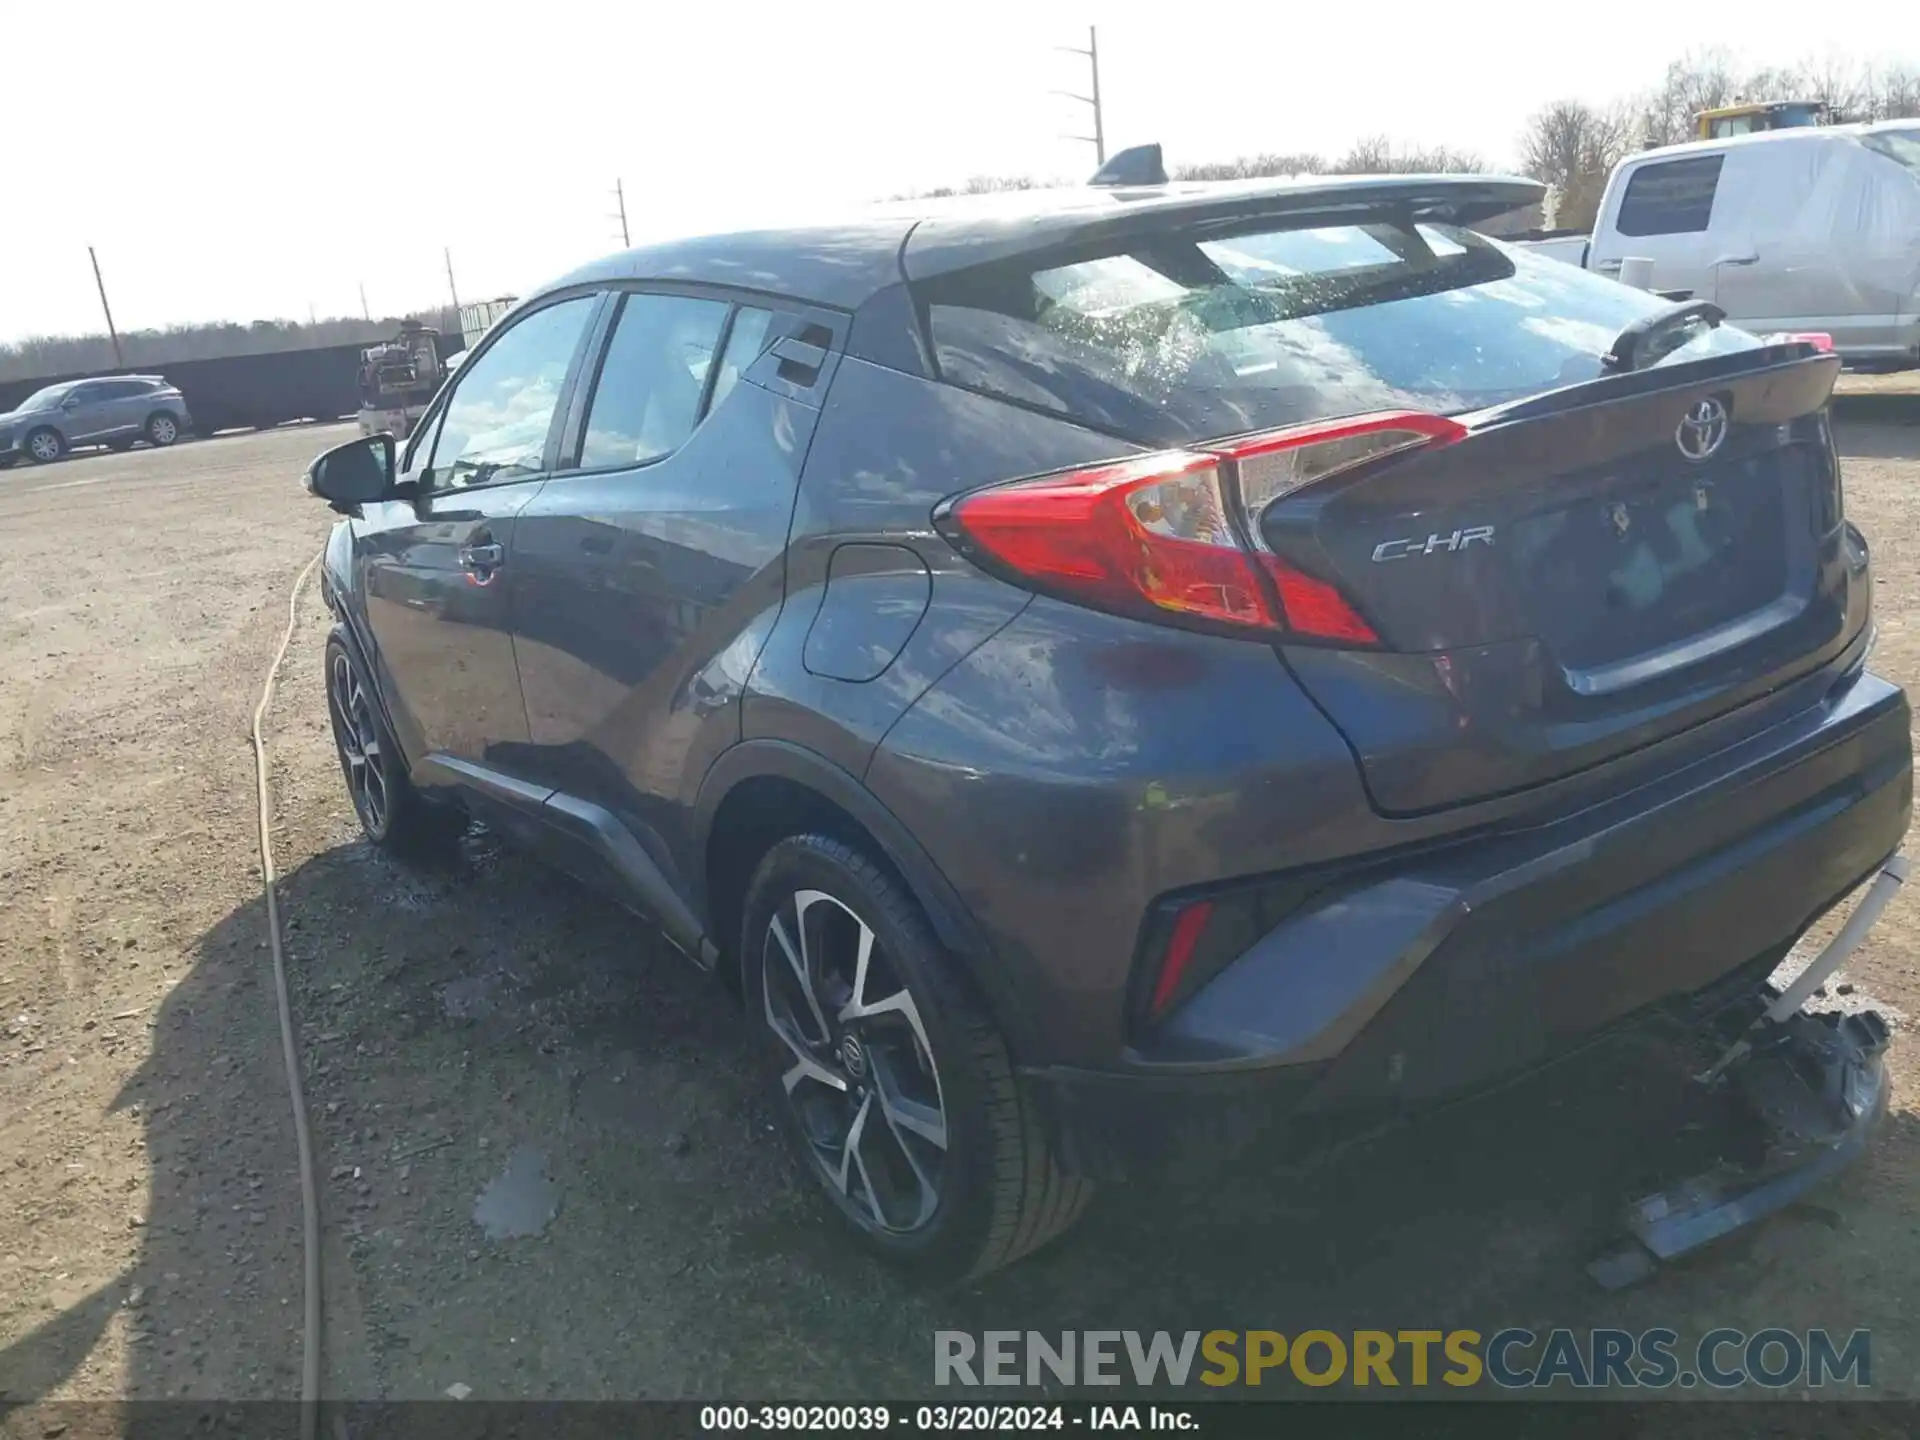 3 Photograph of a damaged car NMTKHMBXXNR145634 TOYOTA C-HR 2022